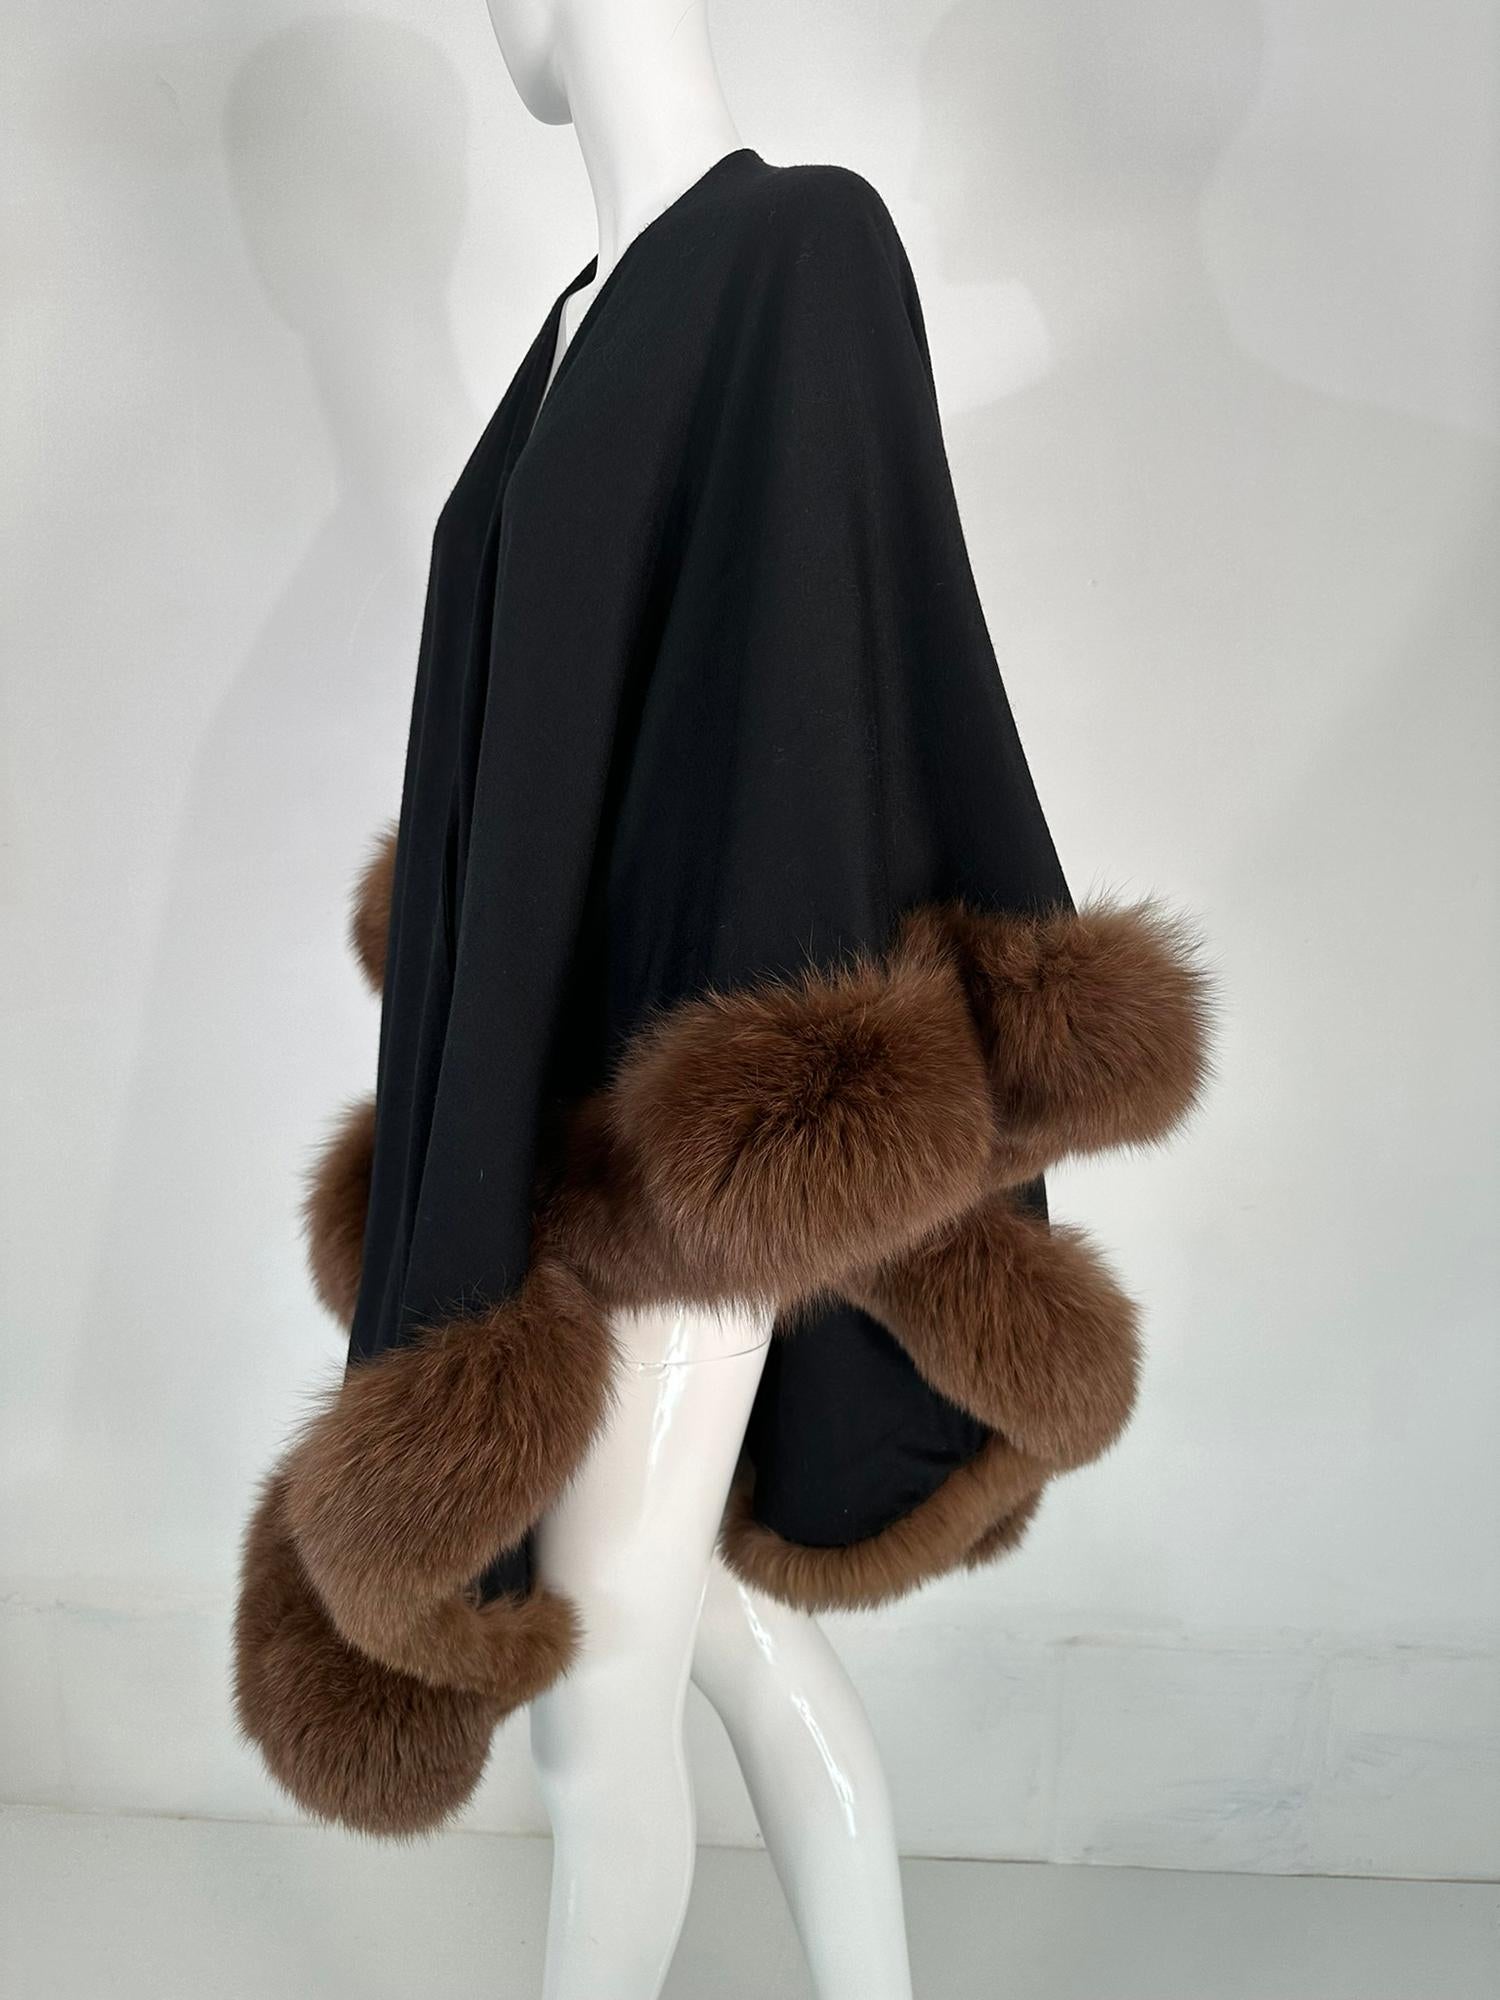 Women's or Men's Adrienne Landau Sable Trimmed Black Wool knit Cape/Wrap From the 1990s For Sale